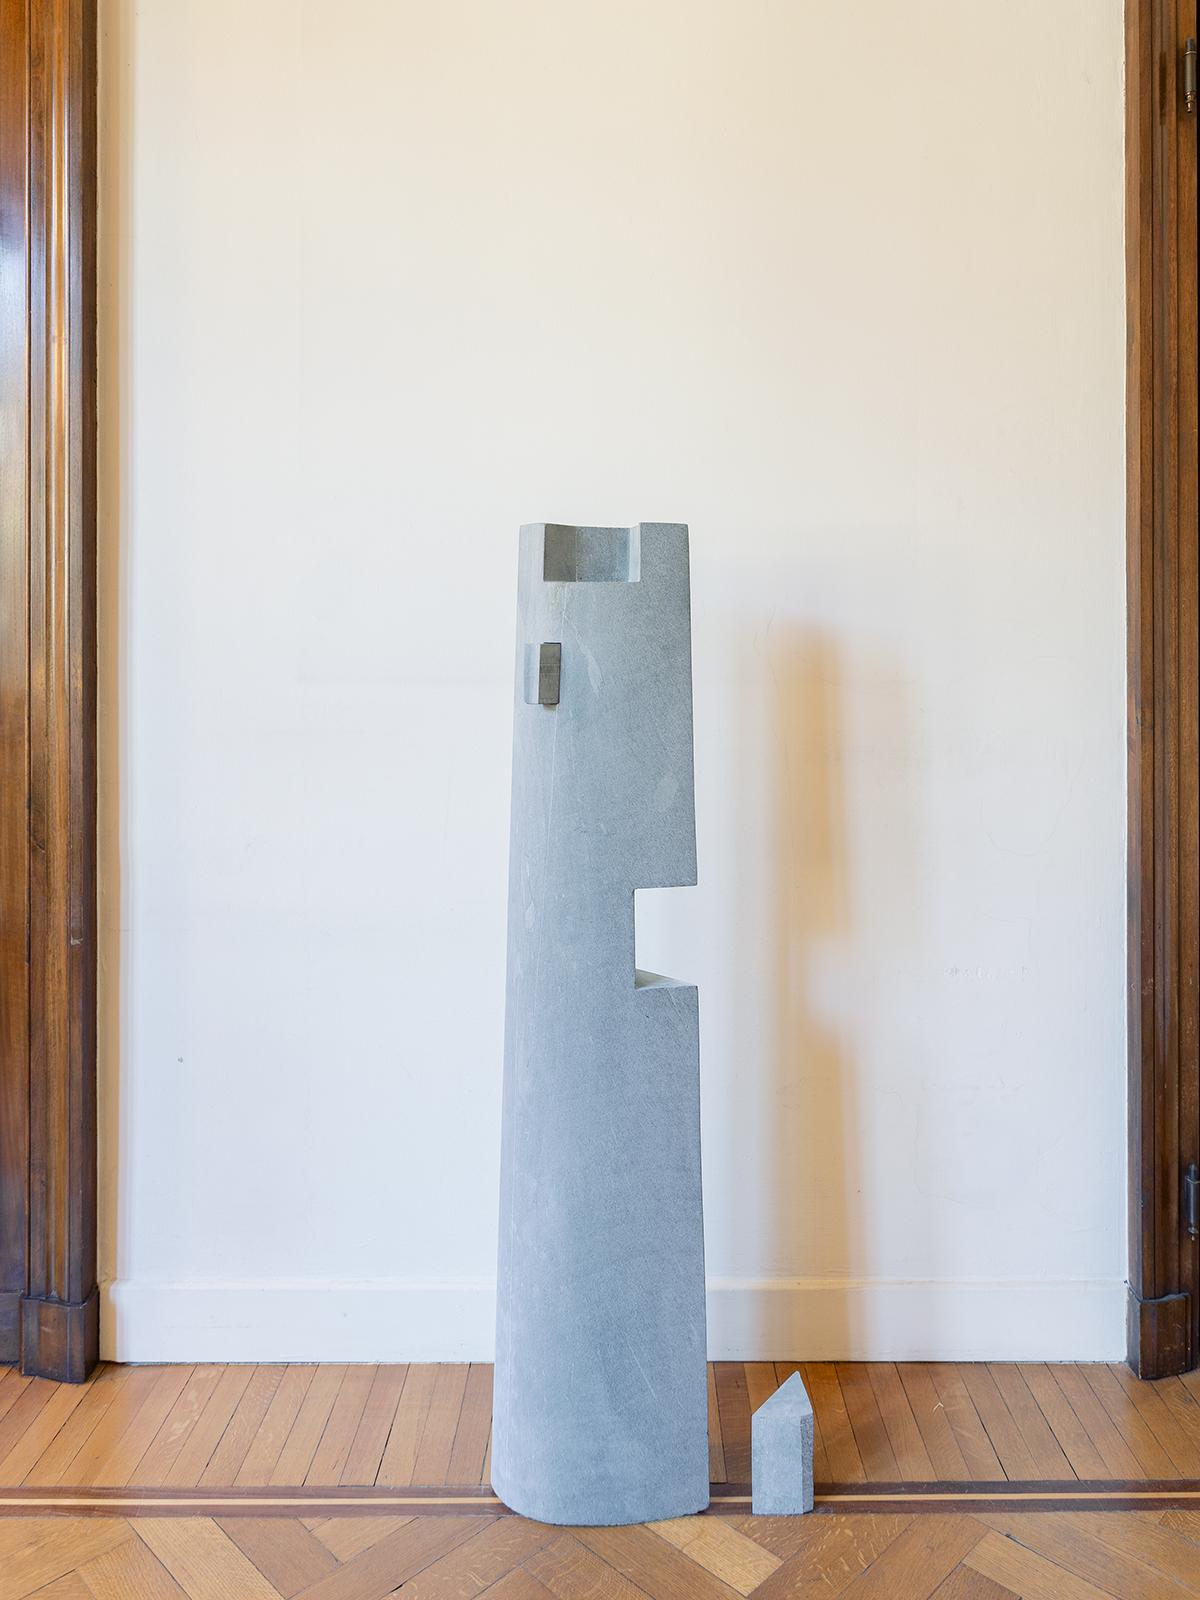 1617G TOTEM sculpture by Scattered Disc Objects.
Limited Edition.
Dimensions: D 28 x W 21 x H 135 cm.
Materials: Flat honed marble surfaces.
Handmade in Italy.
For possible future orders the item can be customized in other marble stones based